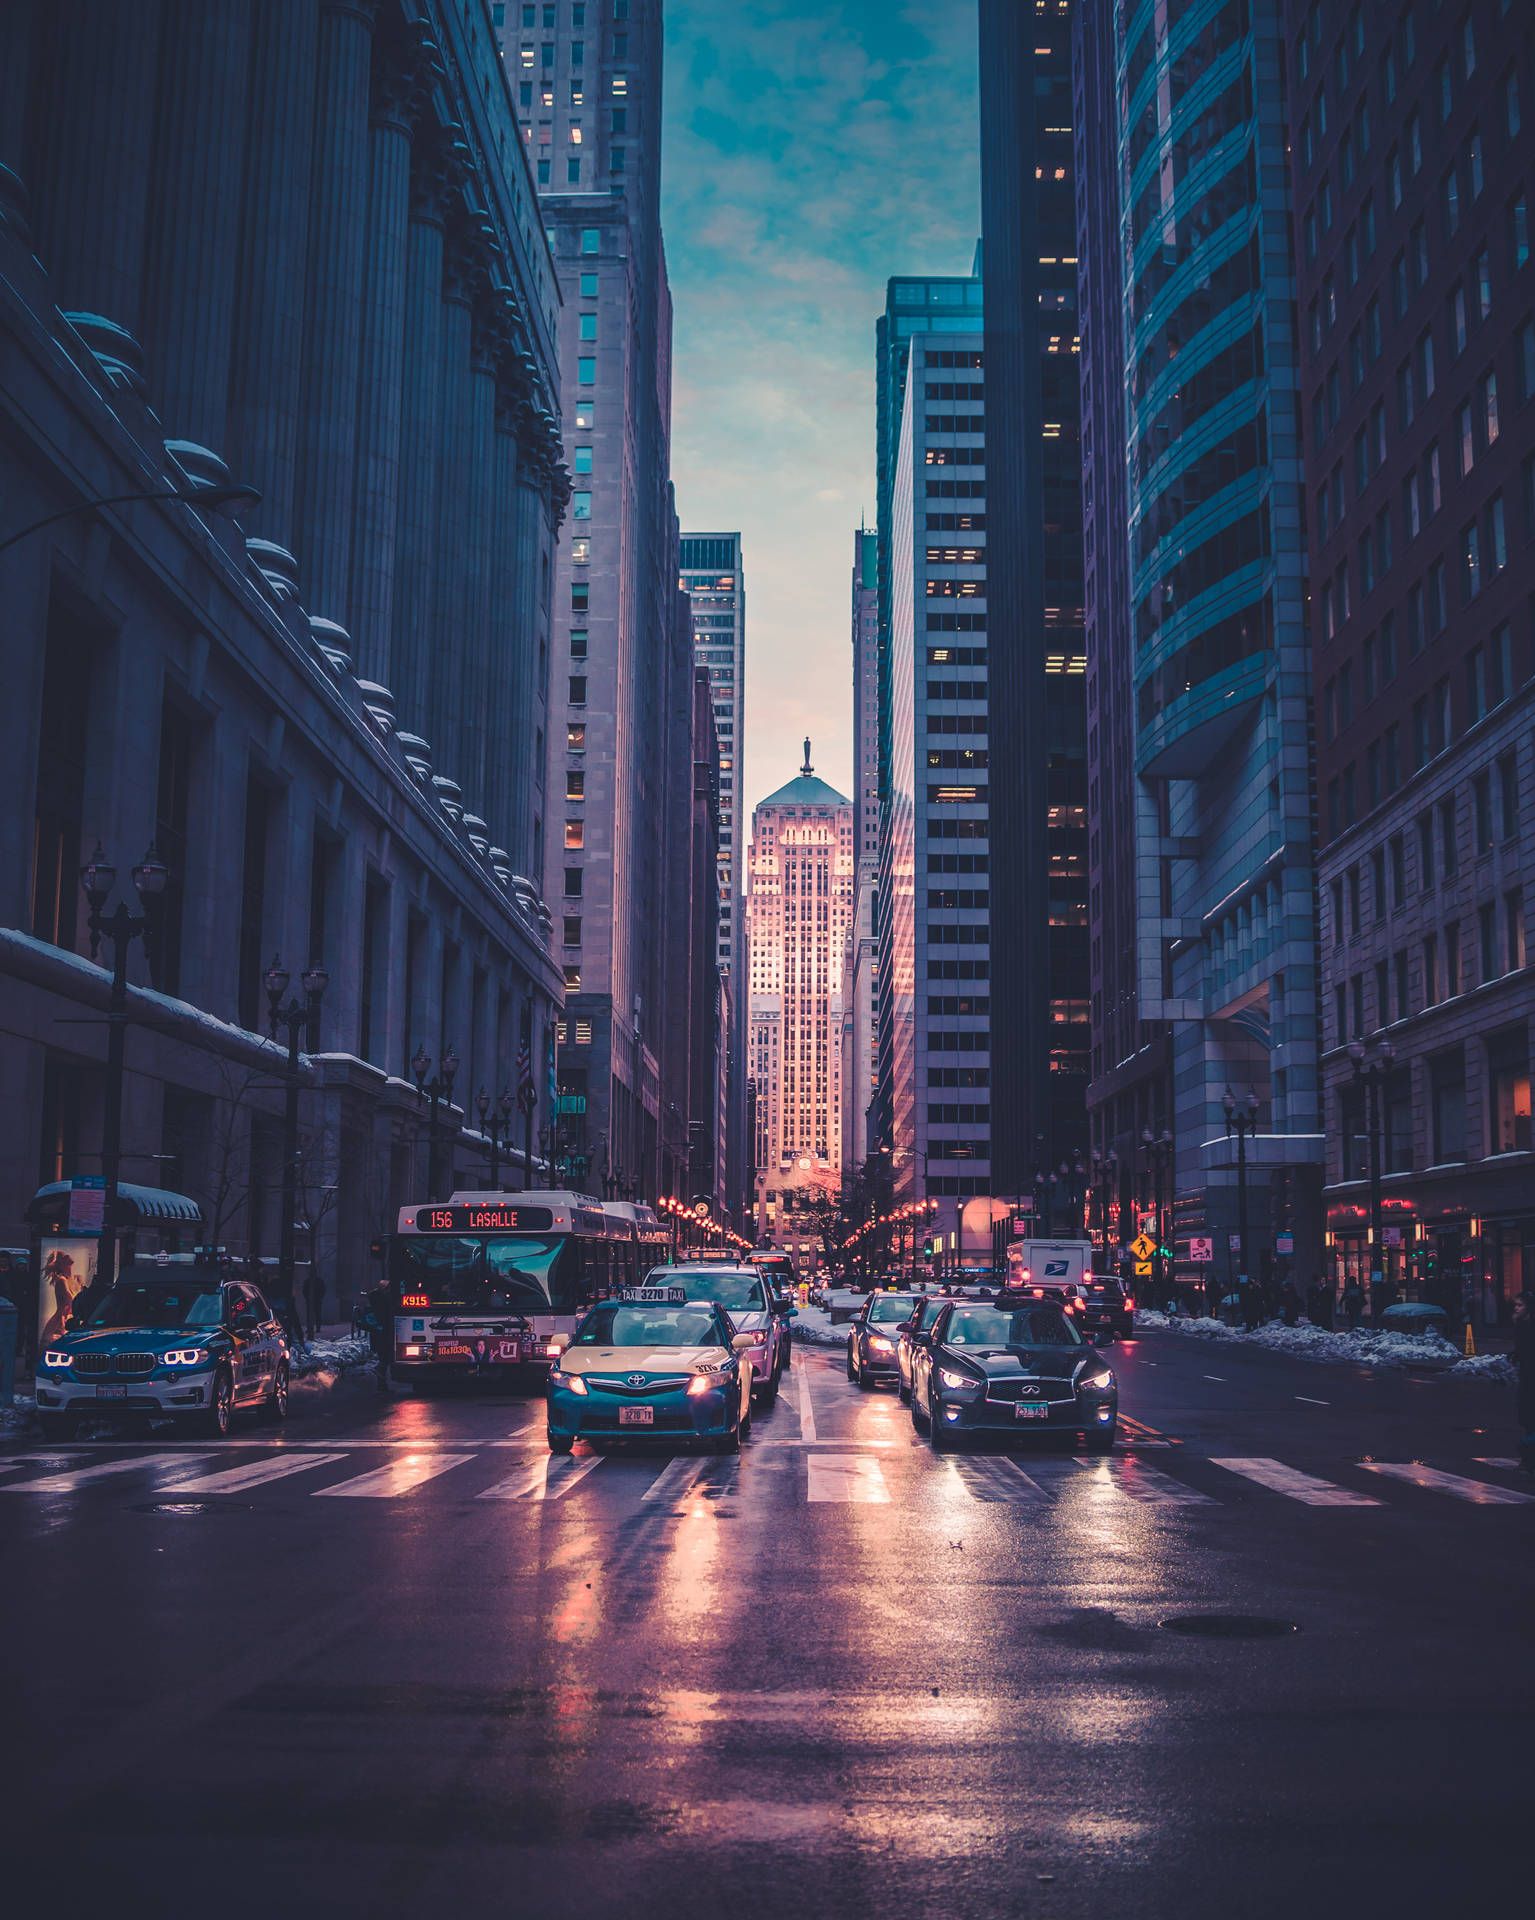 A city street with cars and buildings - Chicago